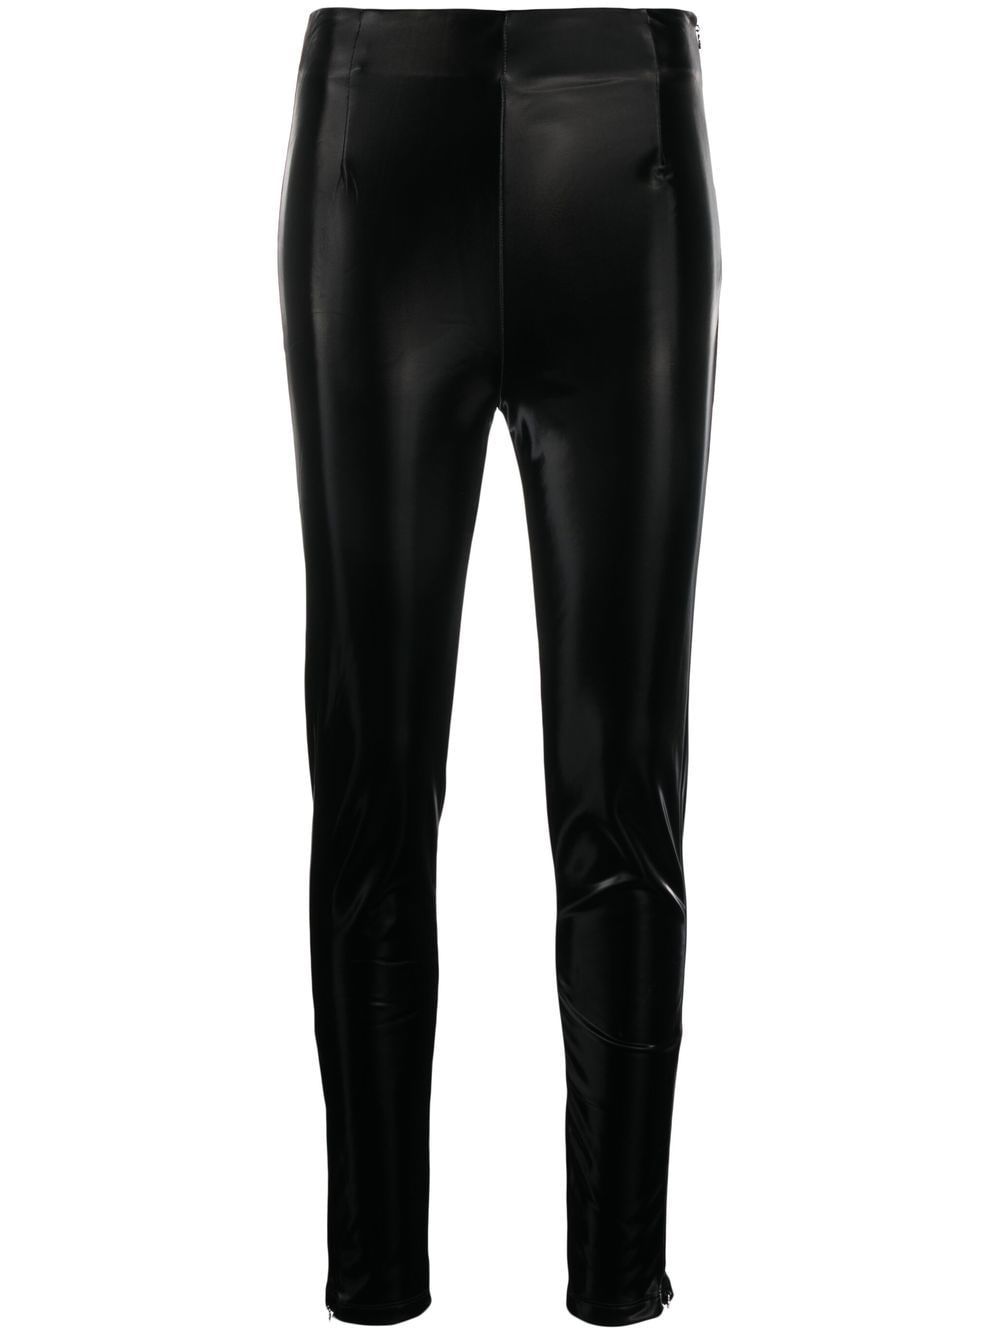 ROTATE BIRGER CHRISTENSEN faux leather leggings - Black von ROTATE BIRGER CHRISTENSEN